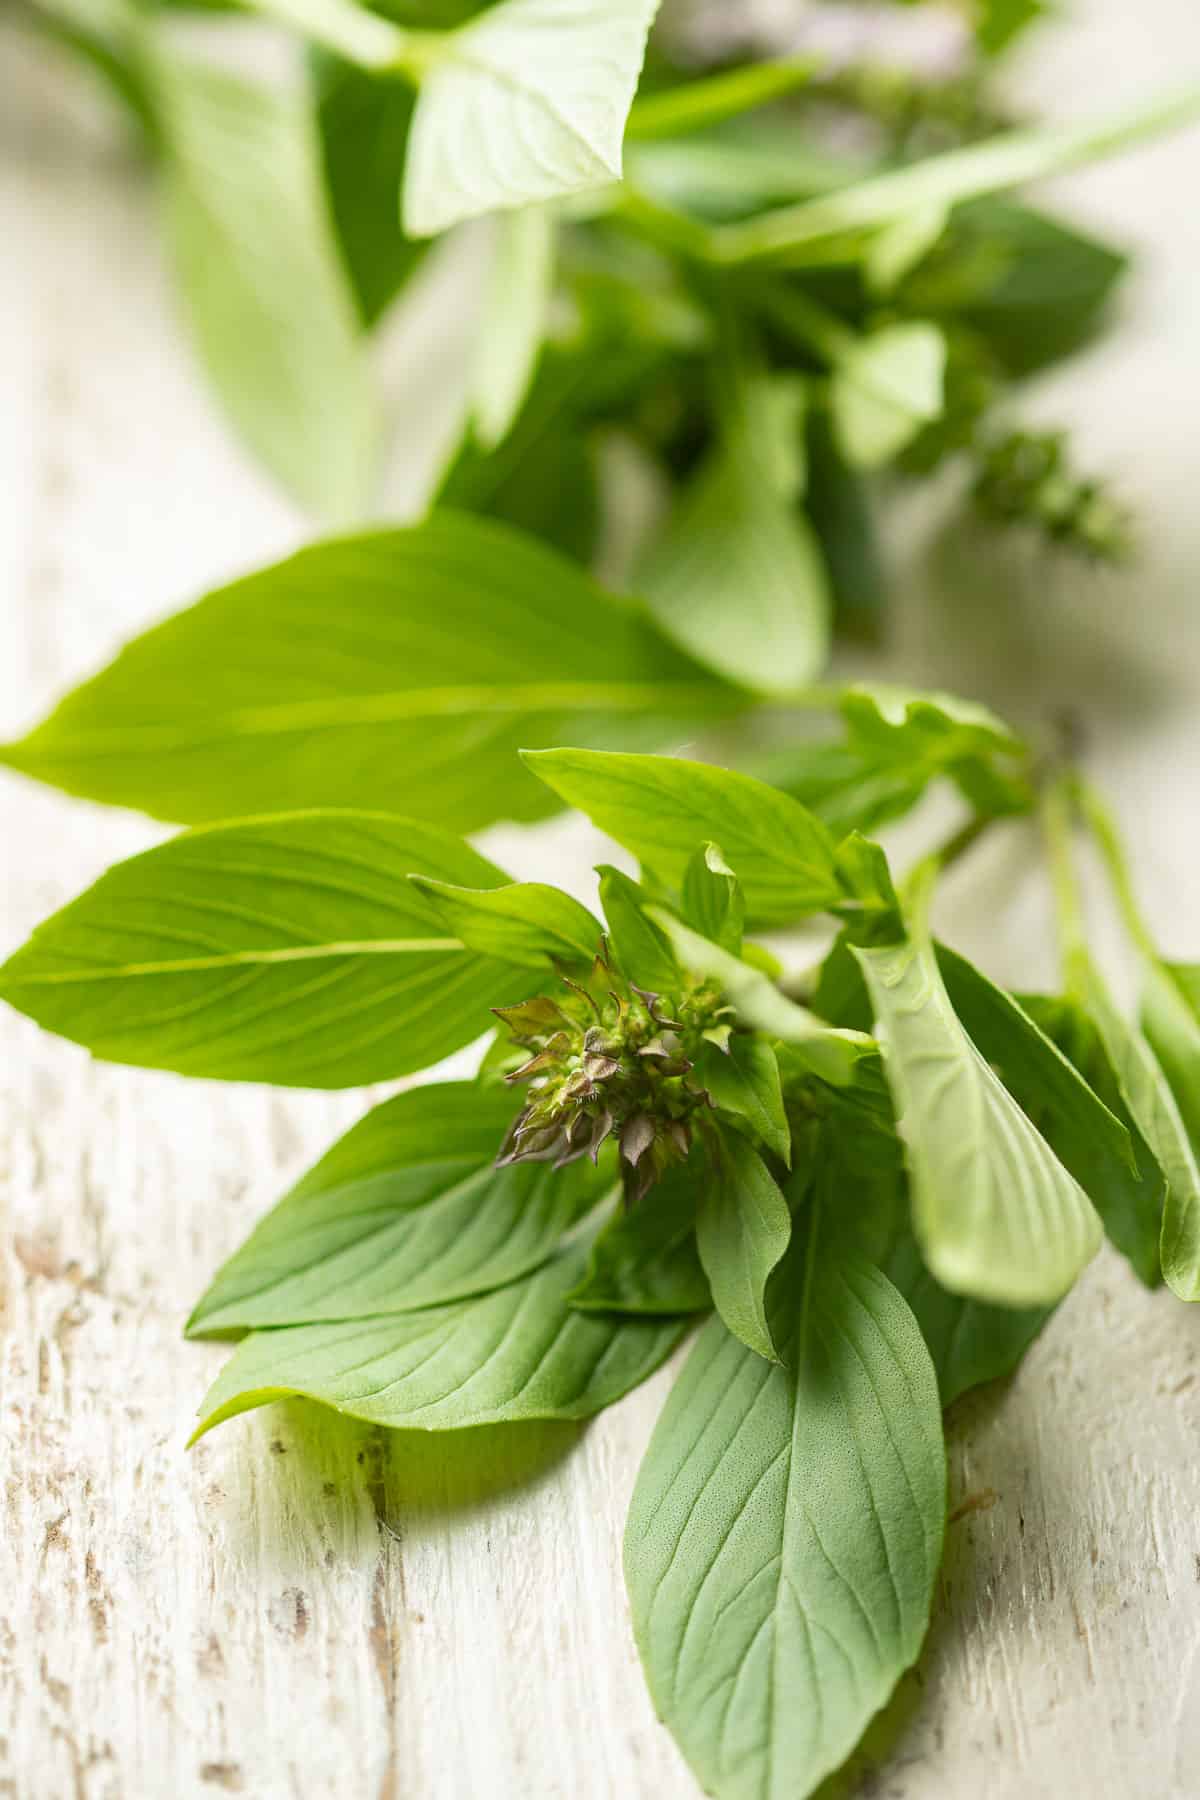 Sprig of fresh Thai basil on a white wooden surface.